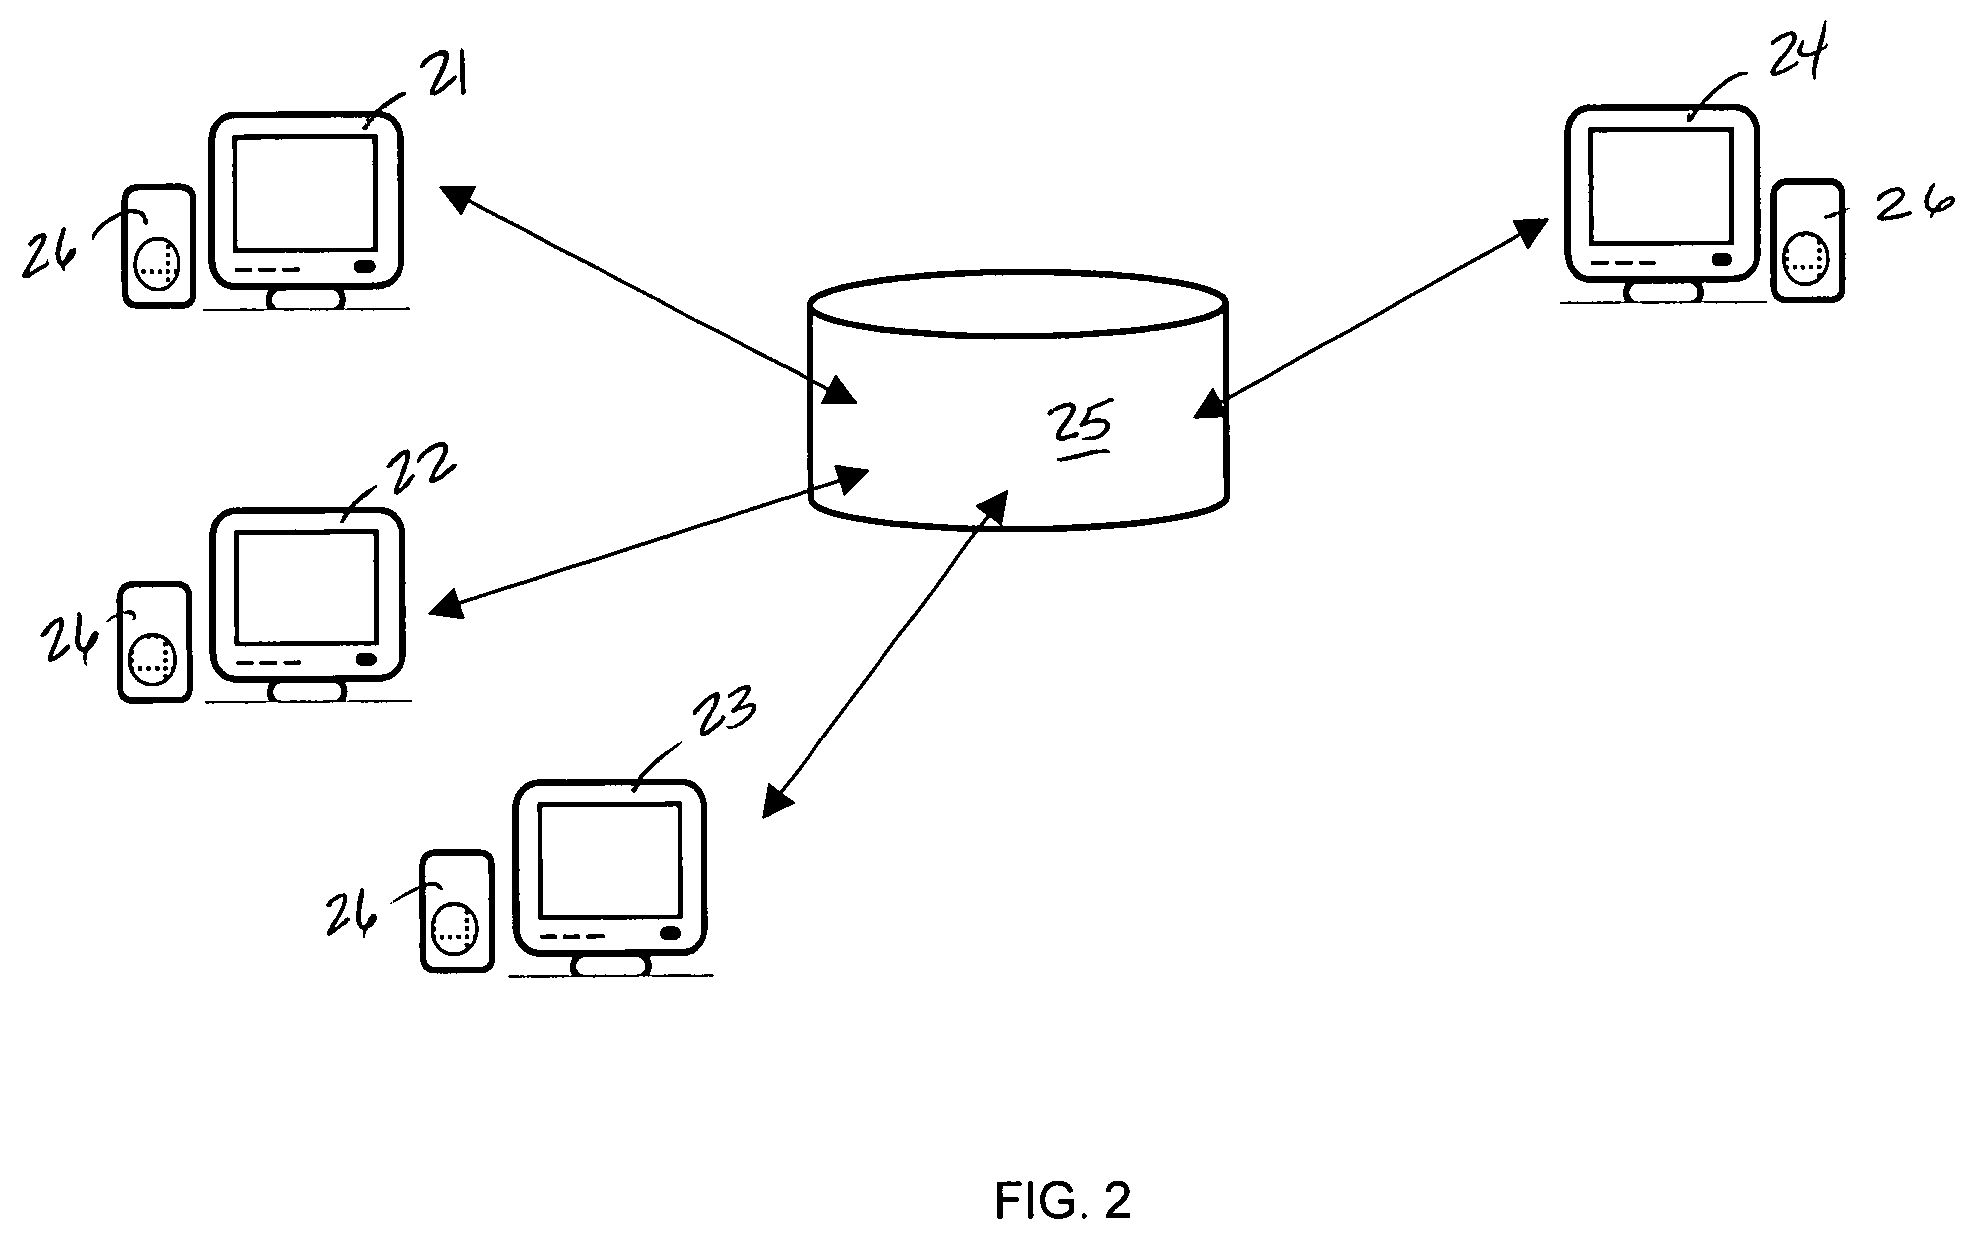 Method and apparatus for website navigation by the visually impaired